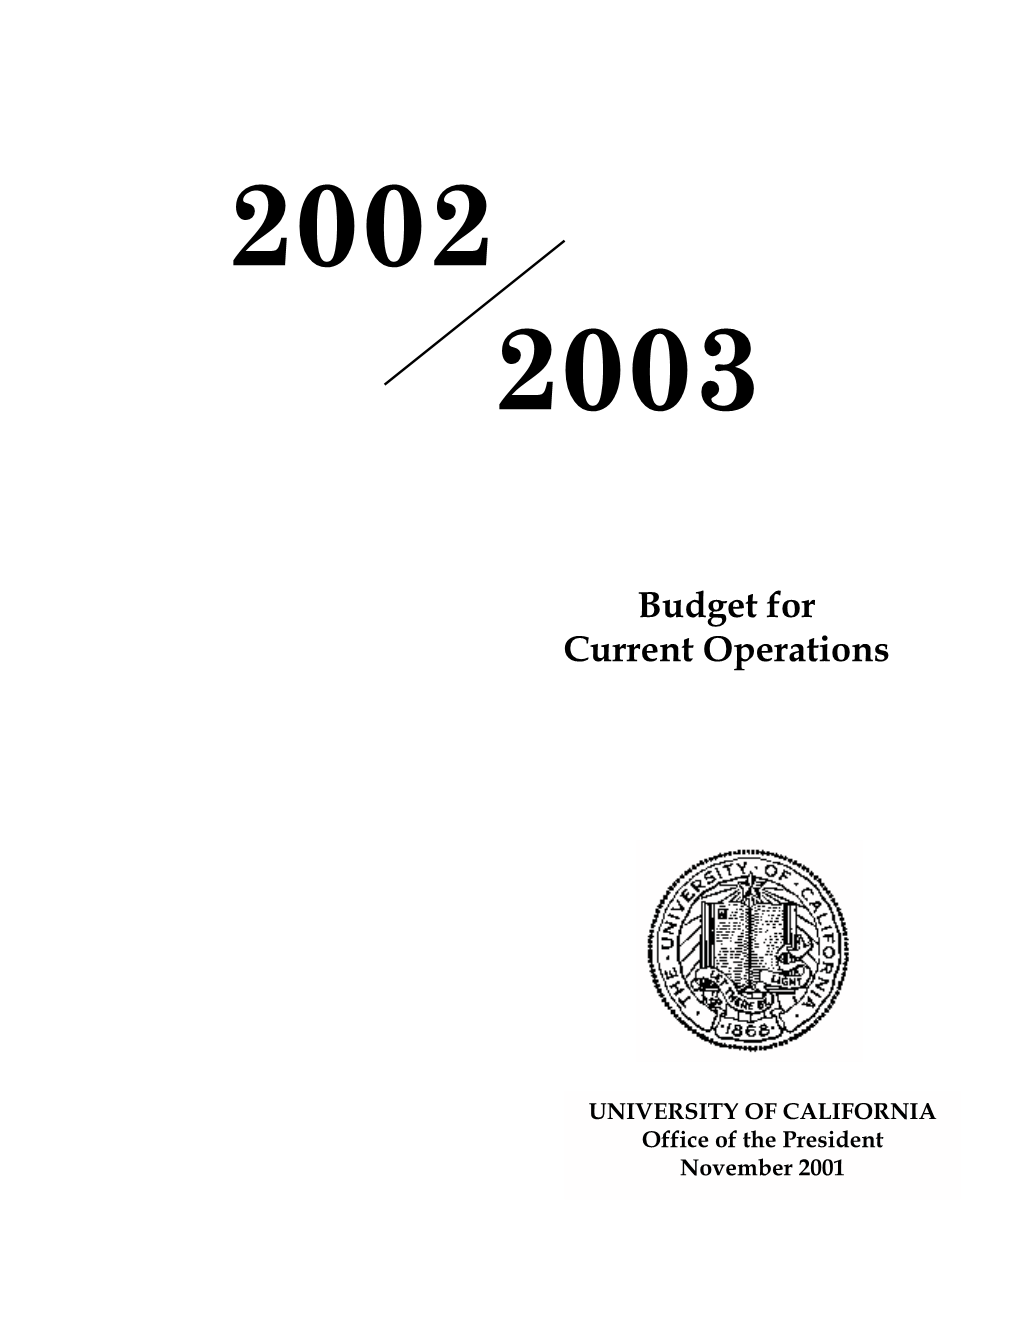 2002-03 Budget for Current Operations and Extramurally Funded Operations (Table)